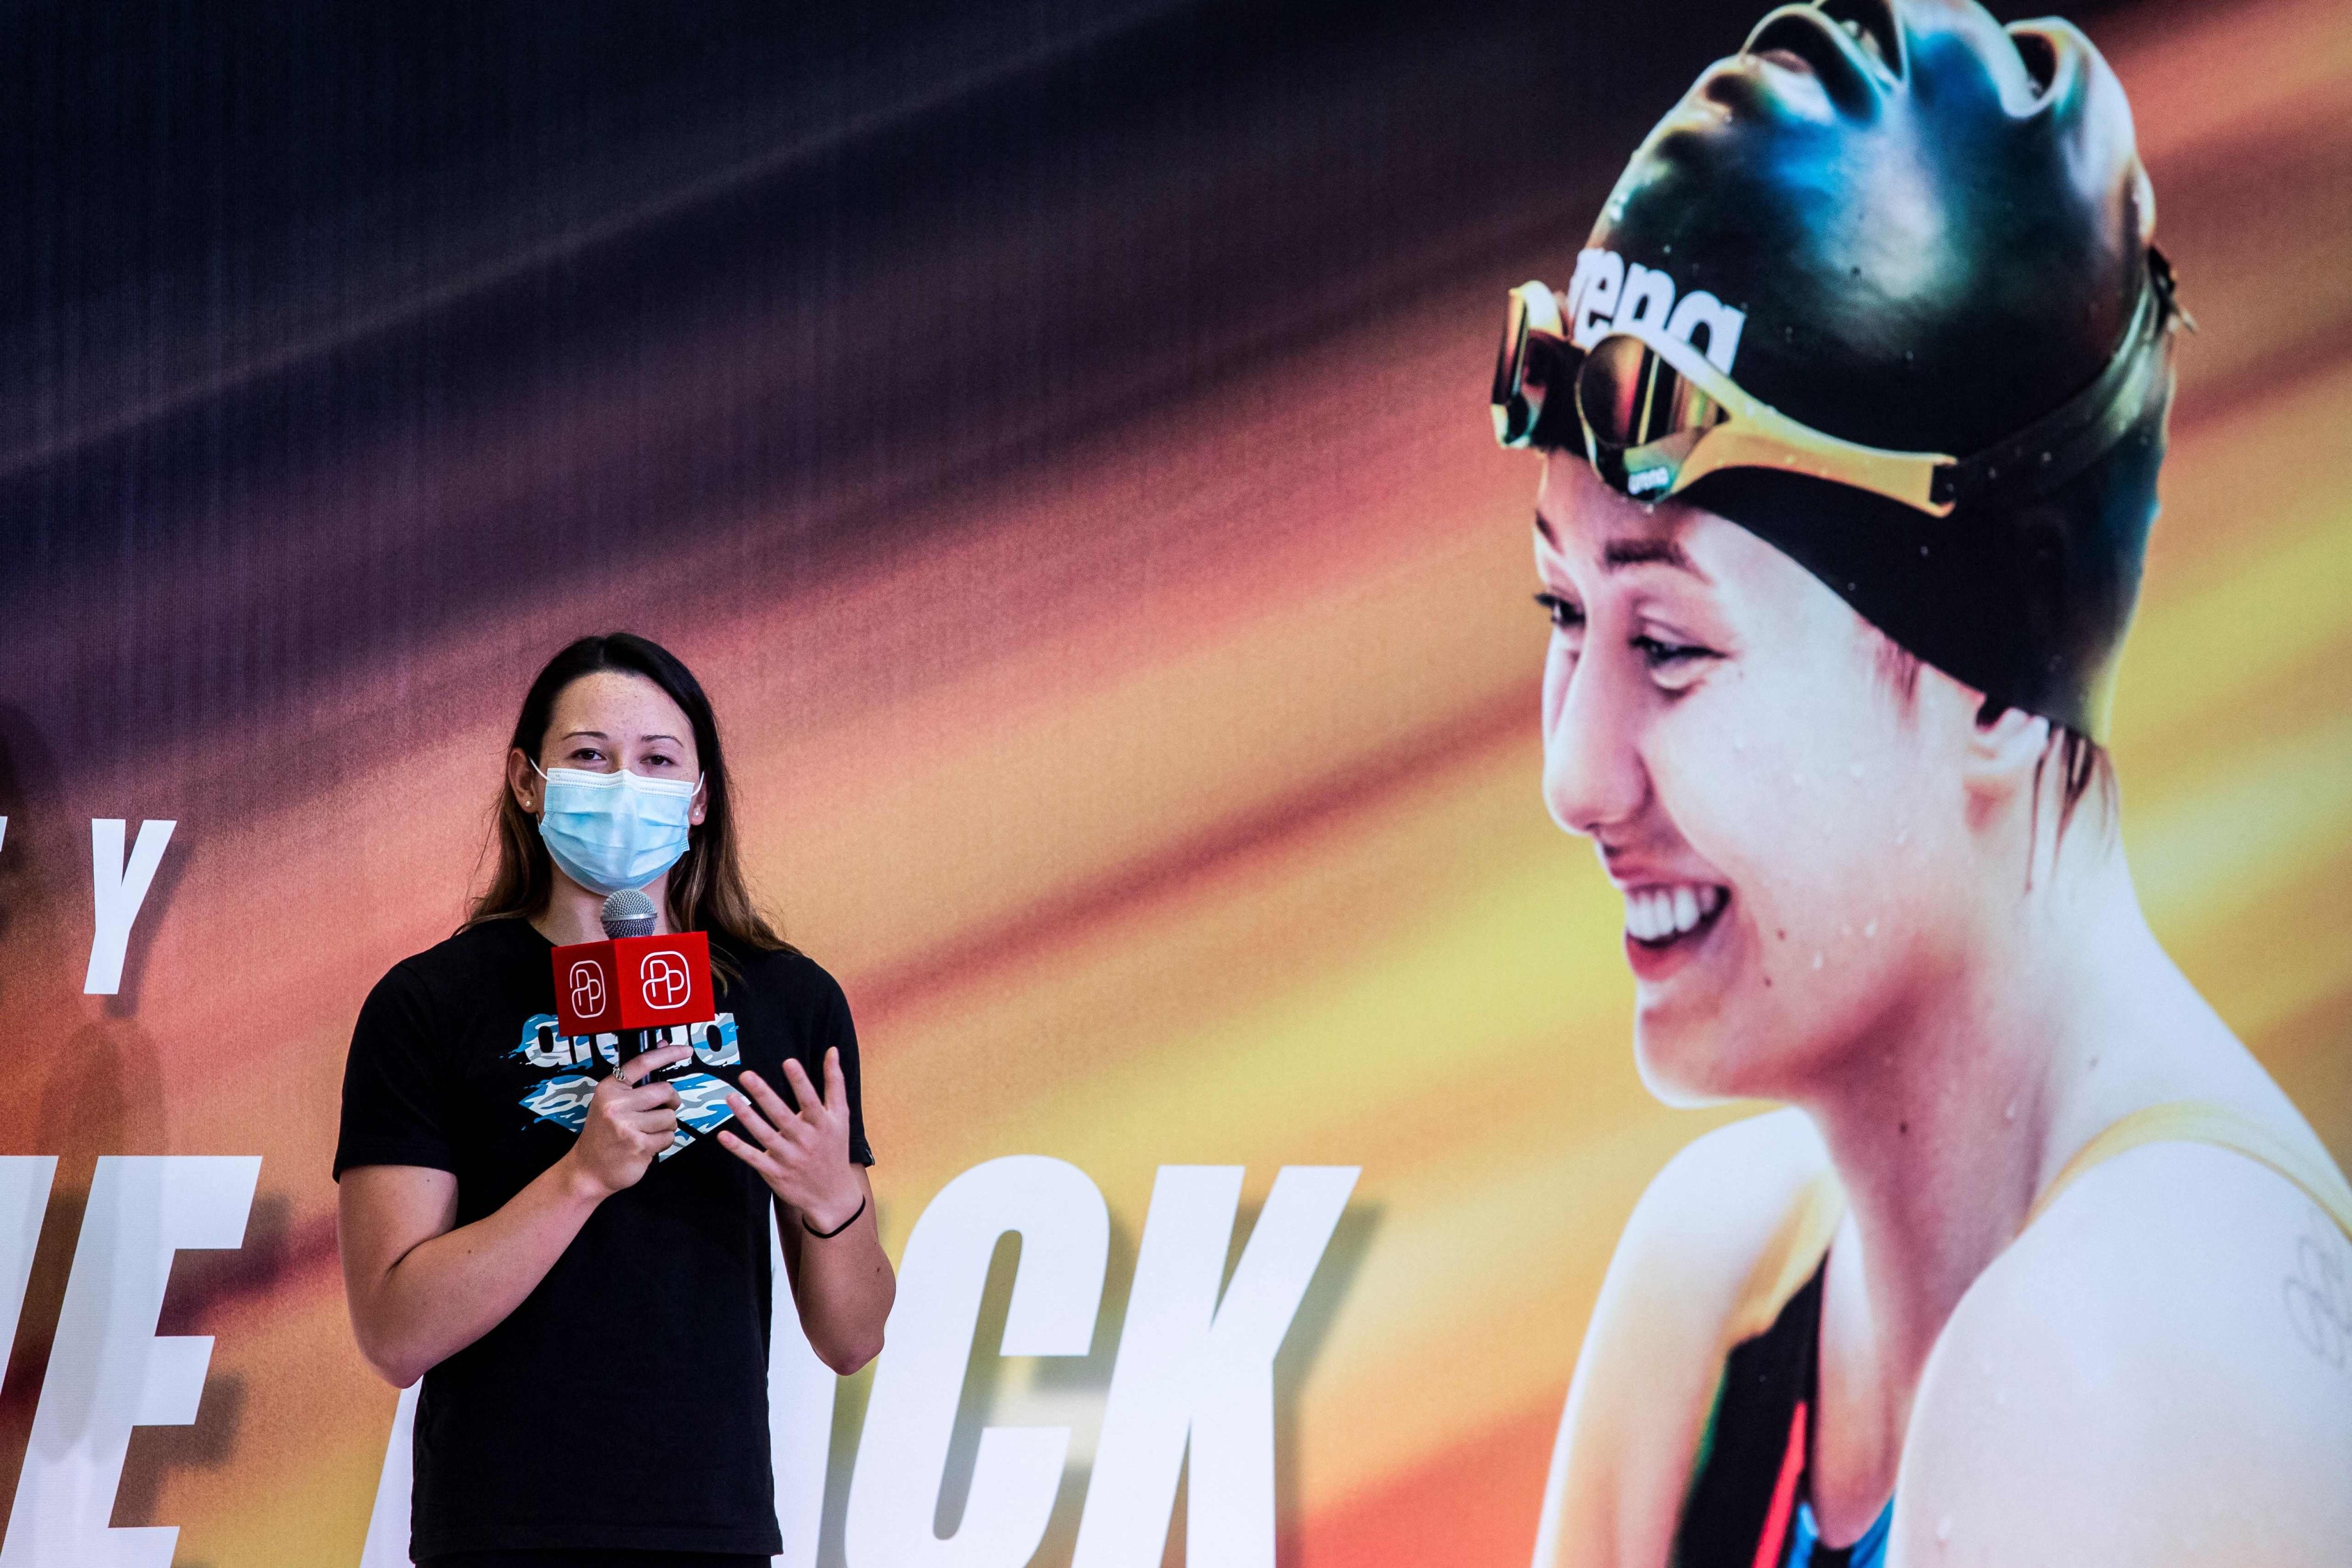 Hong Kong’s Olympic silver-medallist Siobhan Haughey speaks at an event in a mall in Hong Kong on August 20. Haughey has spoken of how she wanted to quit swimming when she was in Primary Six but her mother urged her on. Photo: AFP